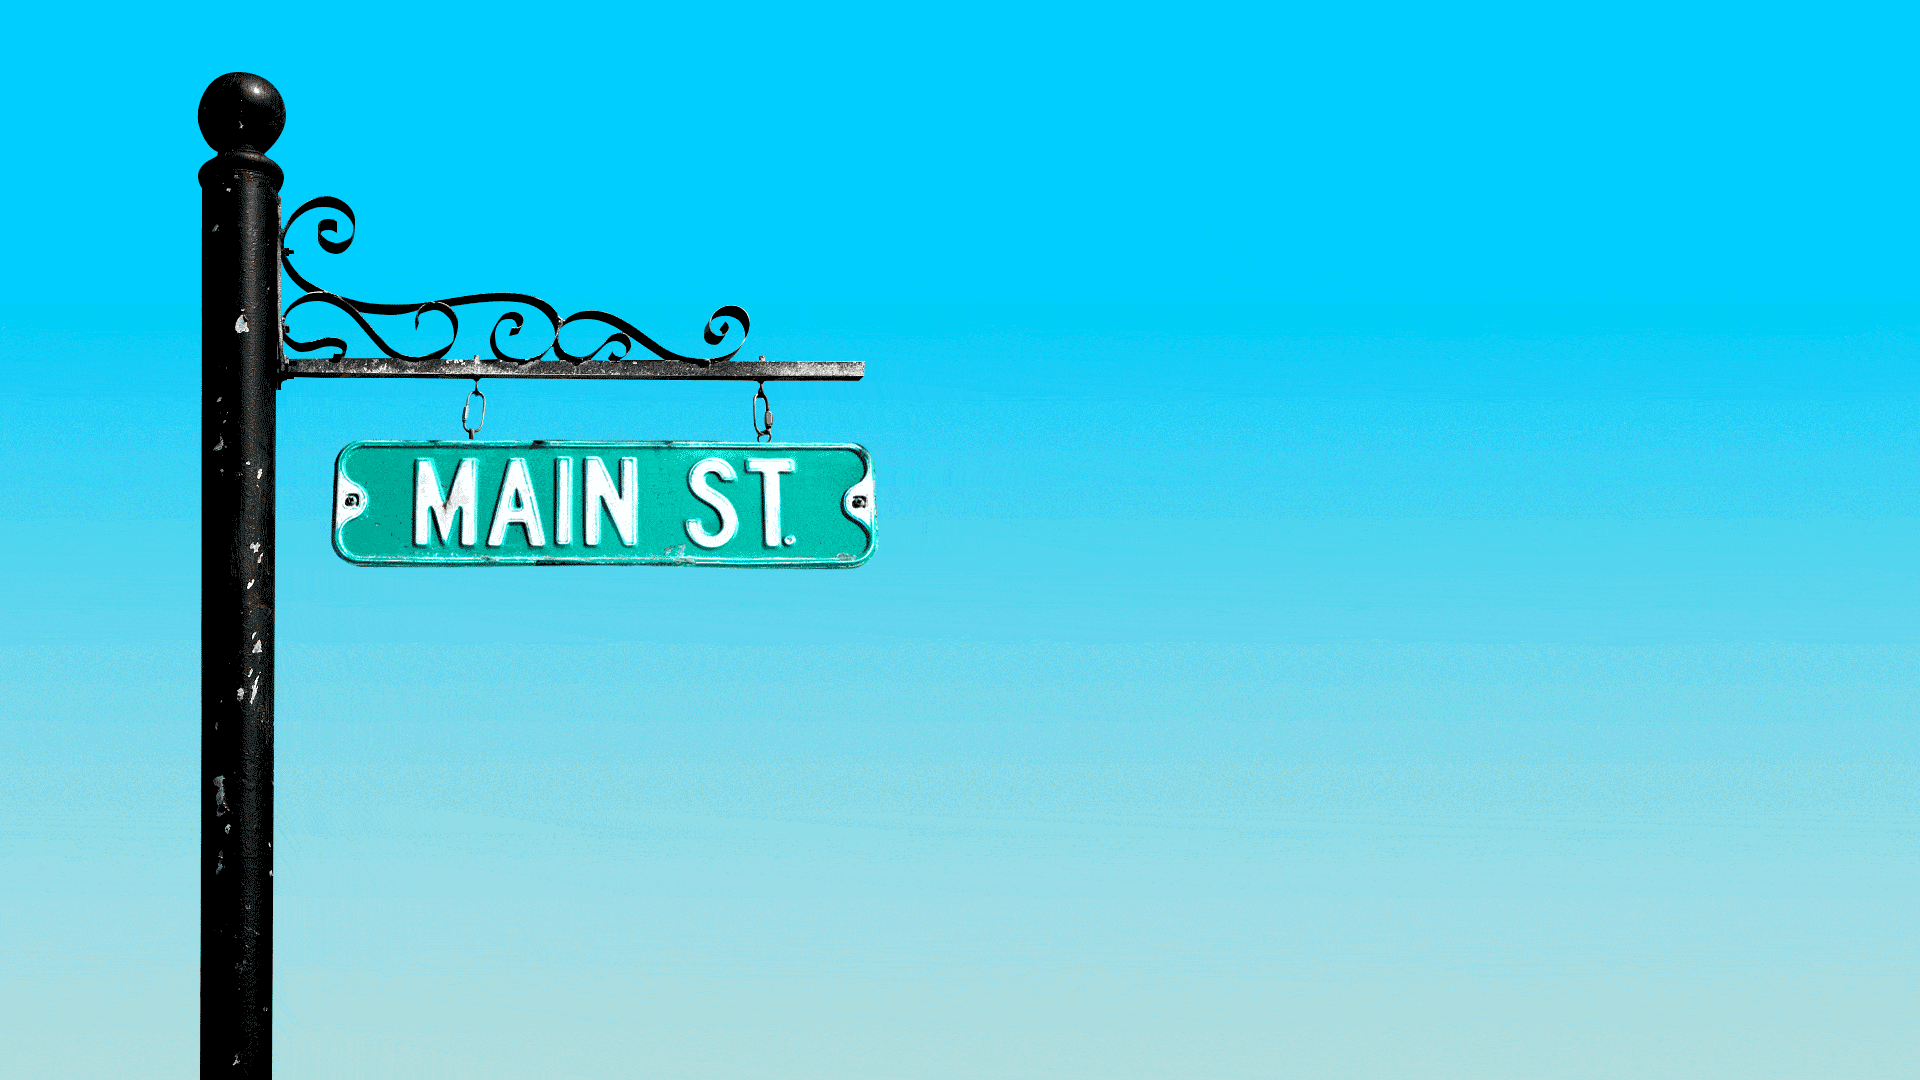 Illustration of a hanging sign that reads "Main St." swinging and hanging from one chain